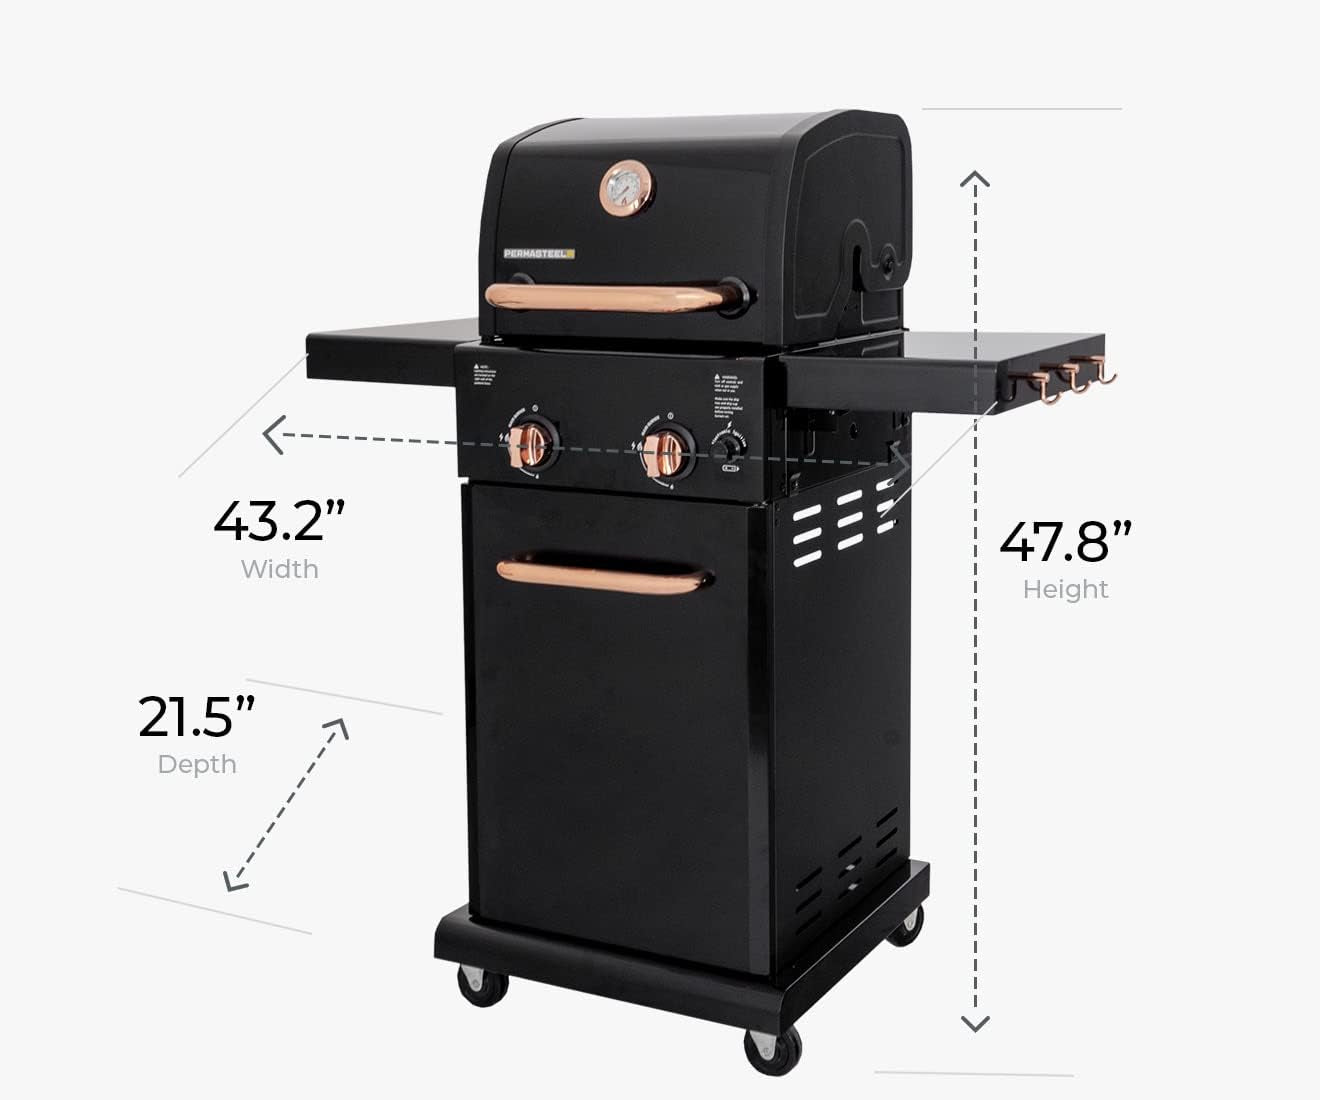 2-Burner Gas Grill, Foldable Side Tables, Grilling Tool Hooks, Propane Gas Barbecue Grill, Black with Copper Accent